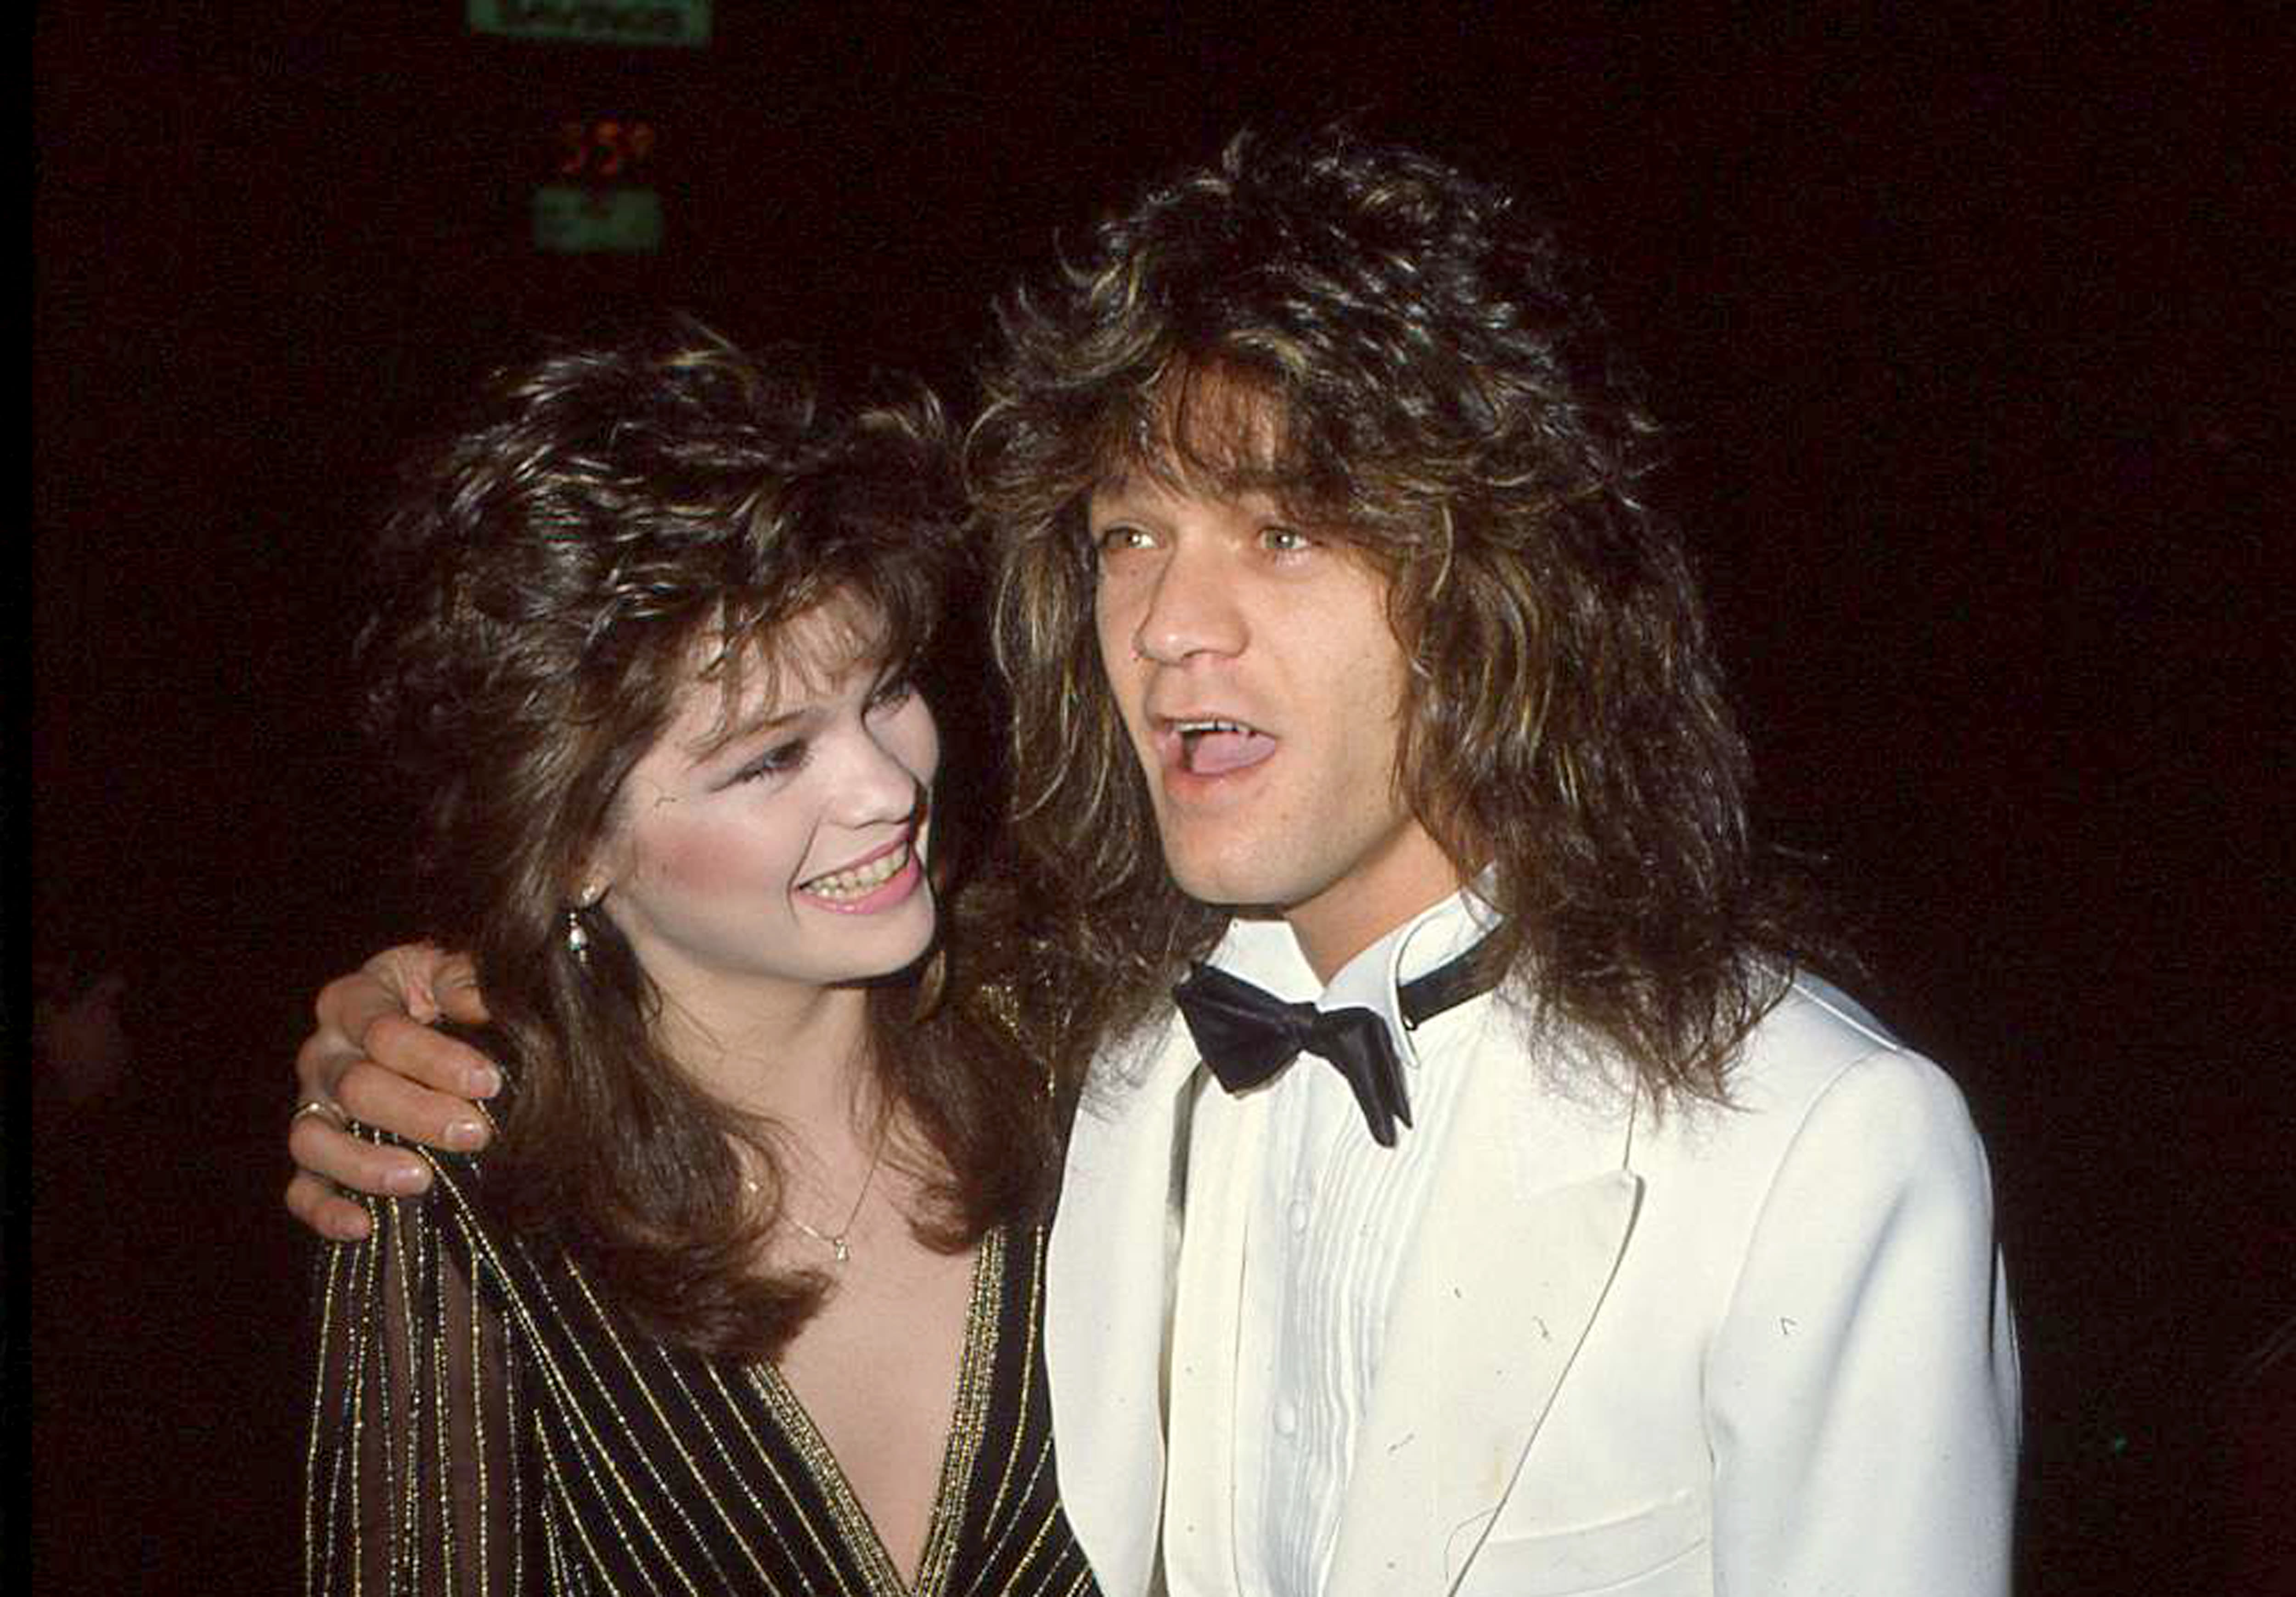 Valerie Bertinelli Reflects on ‘Drugs, Alcohol and Infidelity’ During Eddie Van Halen Marriage